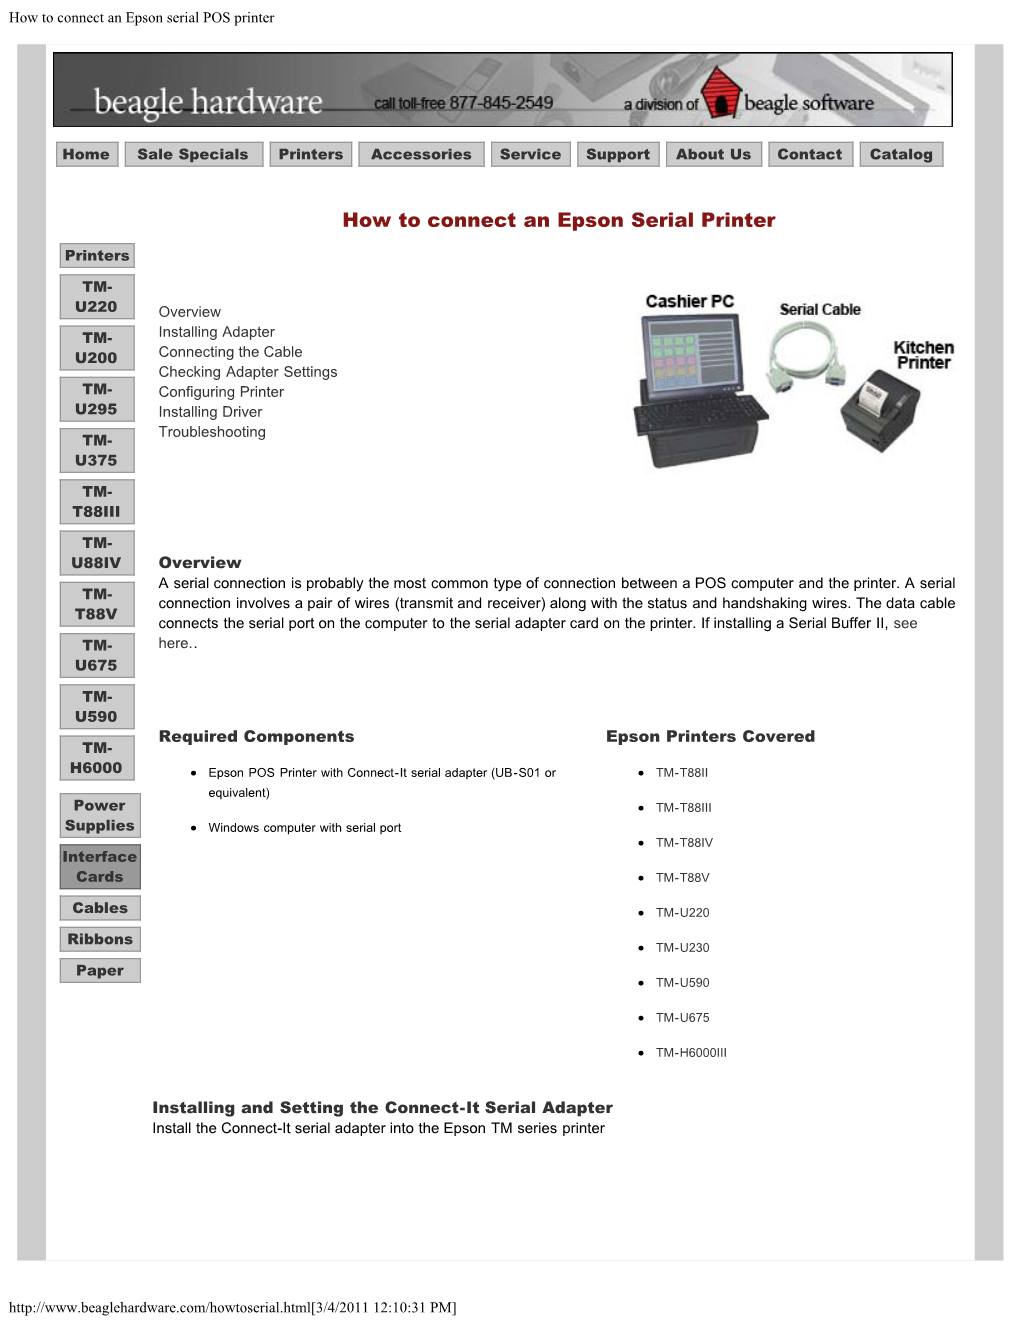 How to Connect an Epson Serial POS Printer